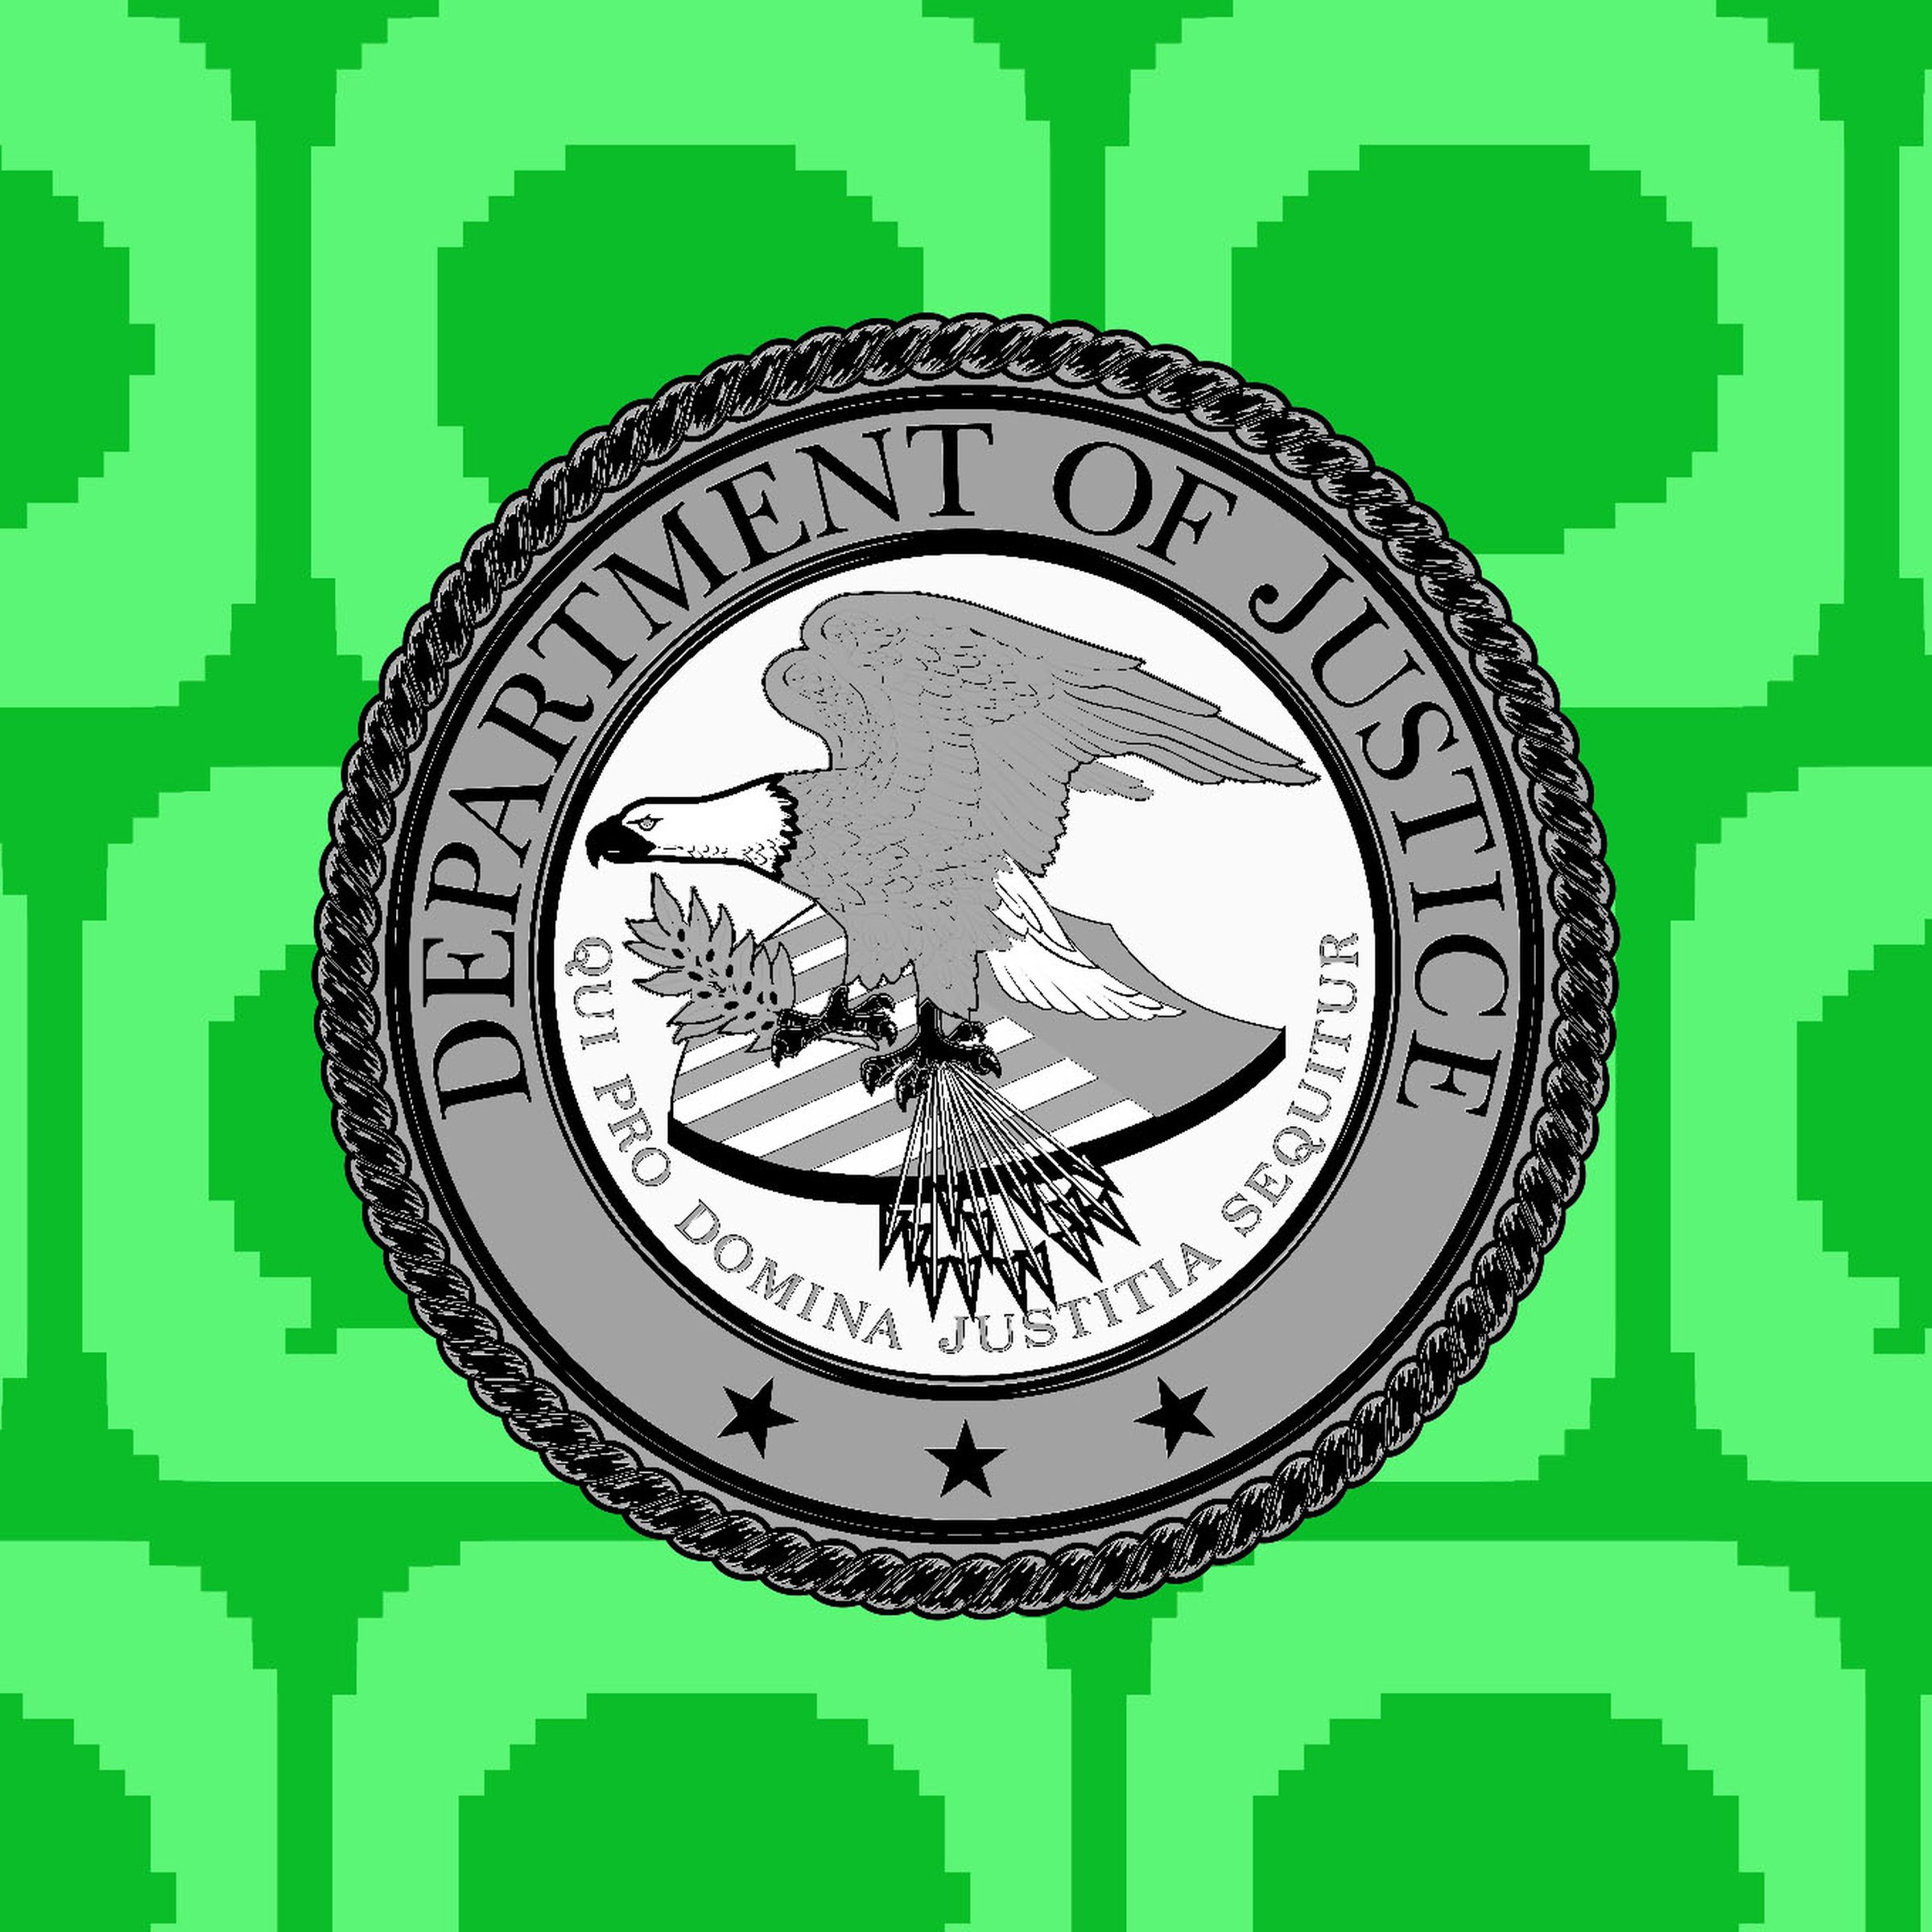 Illustration of the iMessage icon behind the Department of Justice seal.